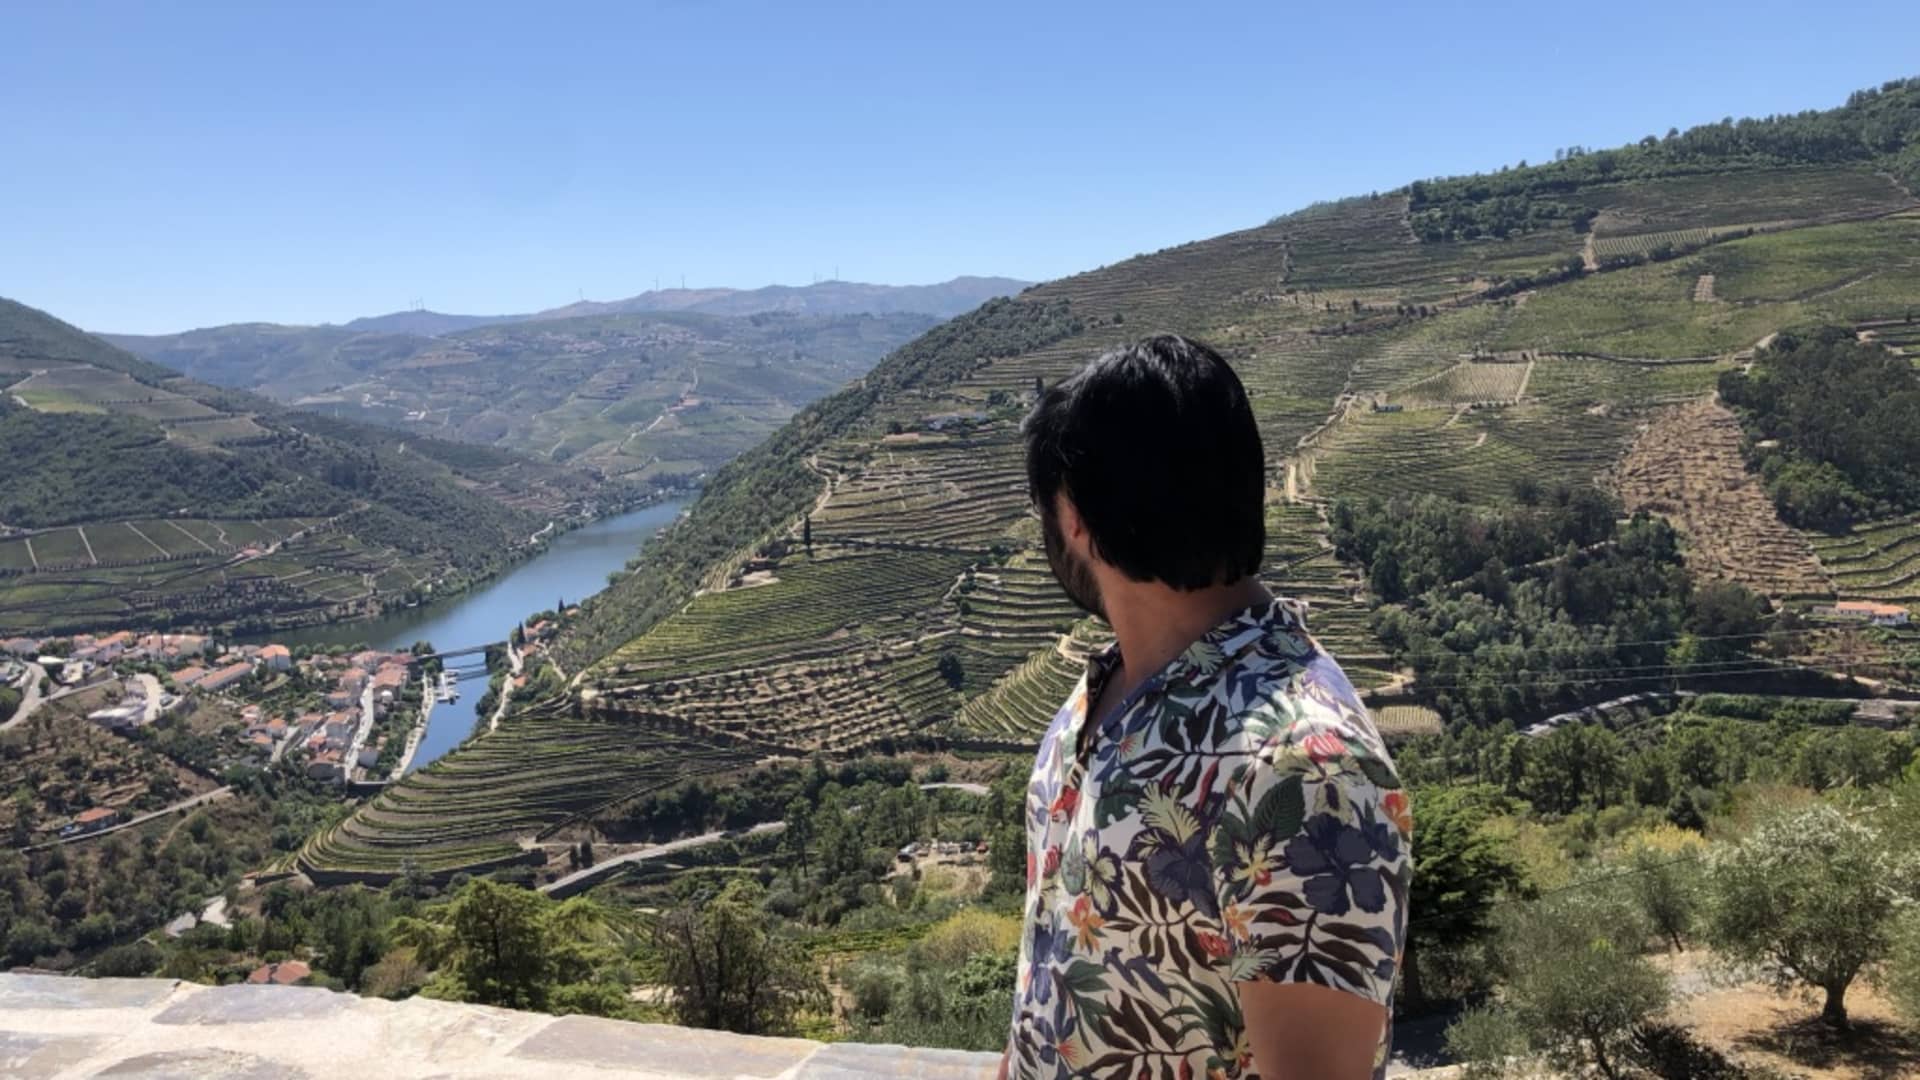 Since the cost of living in Budapest is so affordable for Francis, he gets to travel to scenic spots like Portugal's Douro Valley.